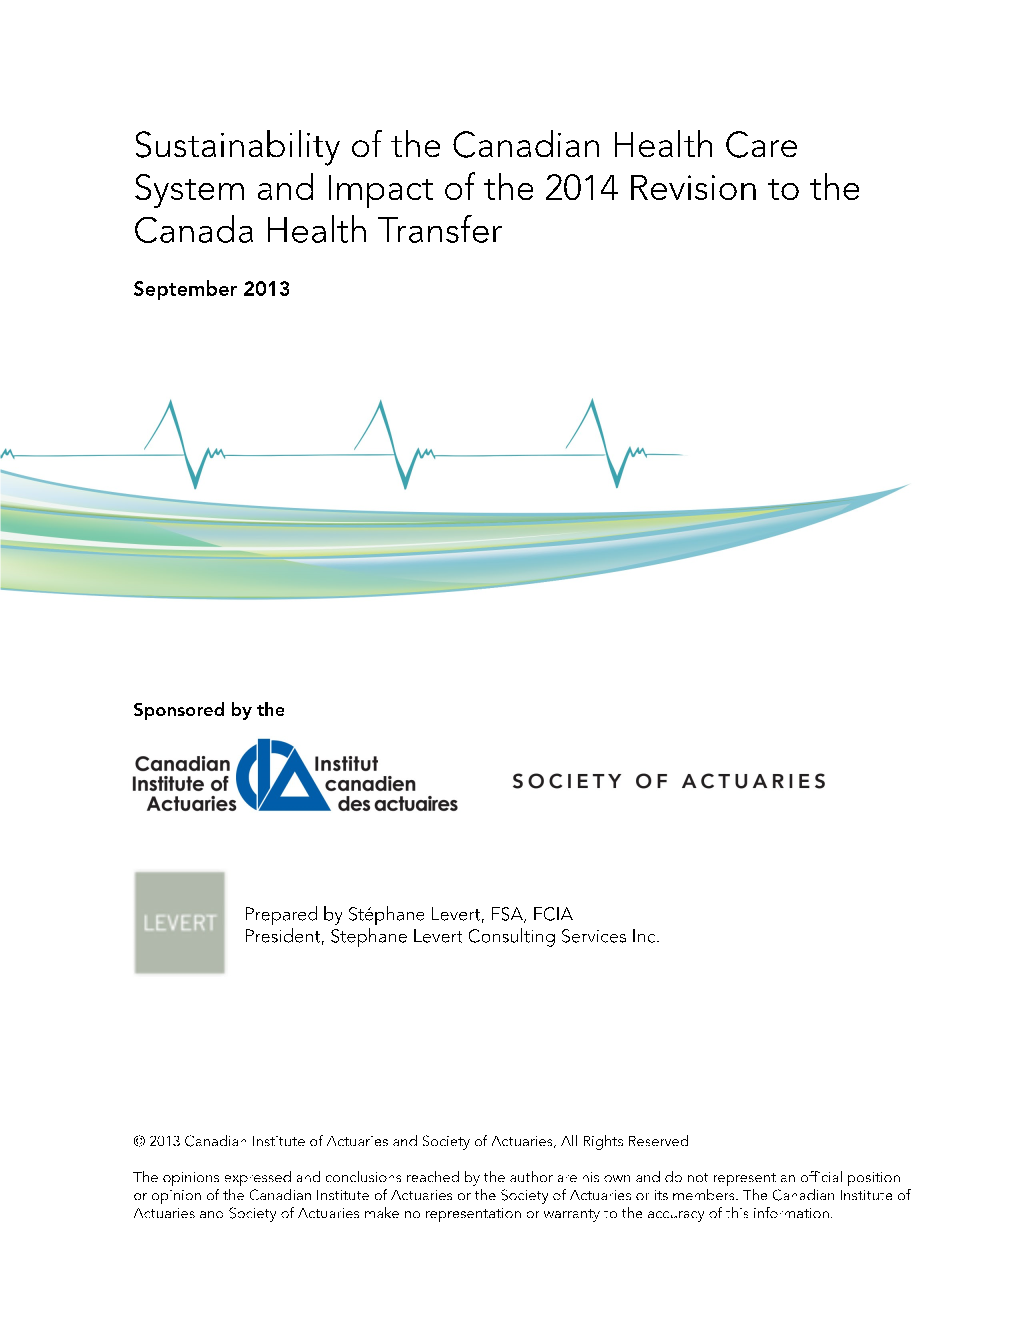 Sustainability of the Canadian Health Care System and Impact of the 2014 Revision to the Canada Health Transfer